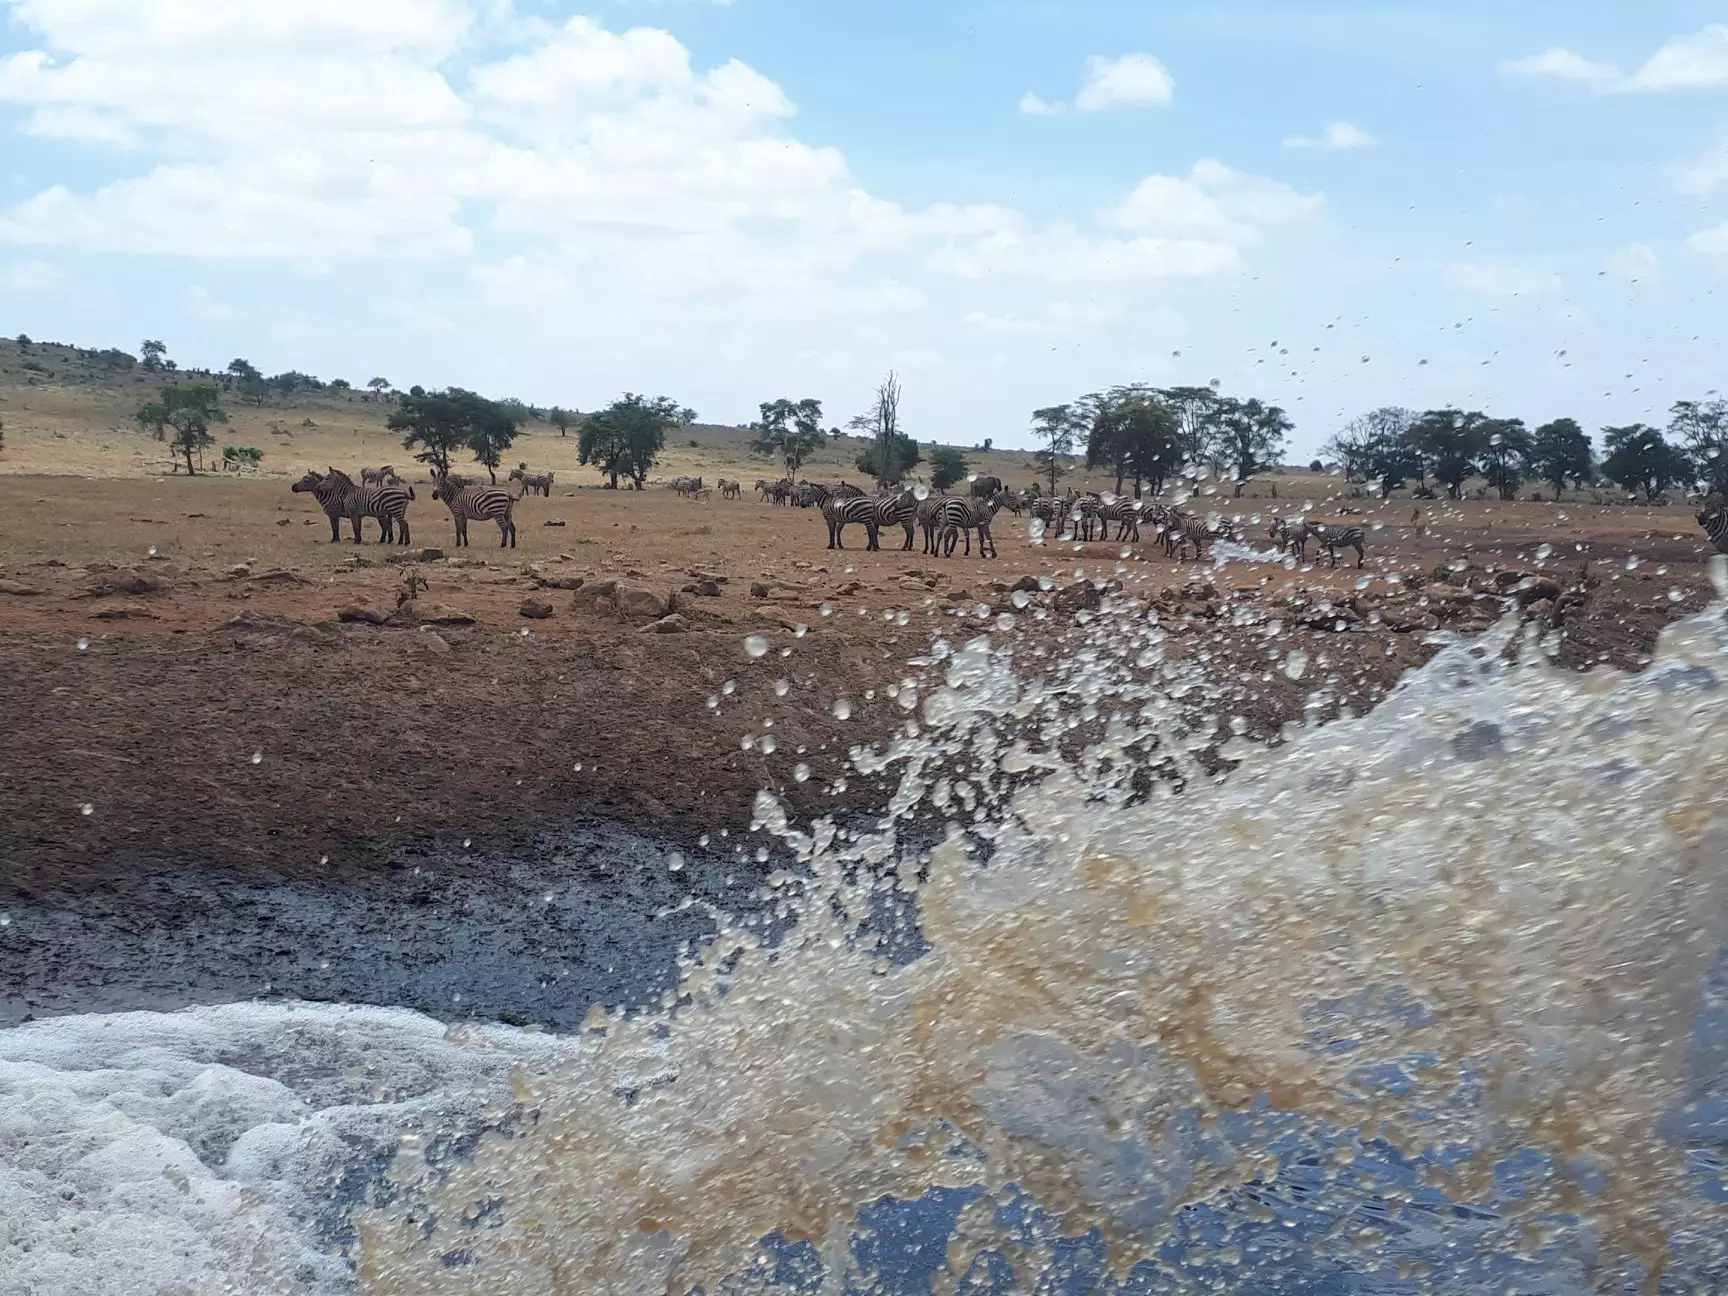 The farmer brings water to the Tsavo West National Park in Kenya.